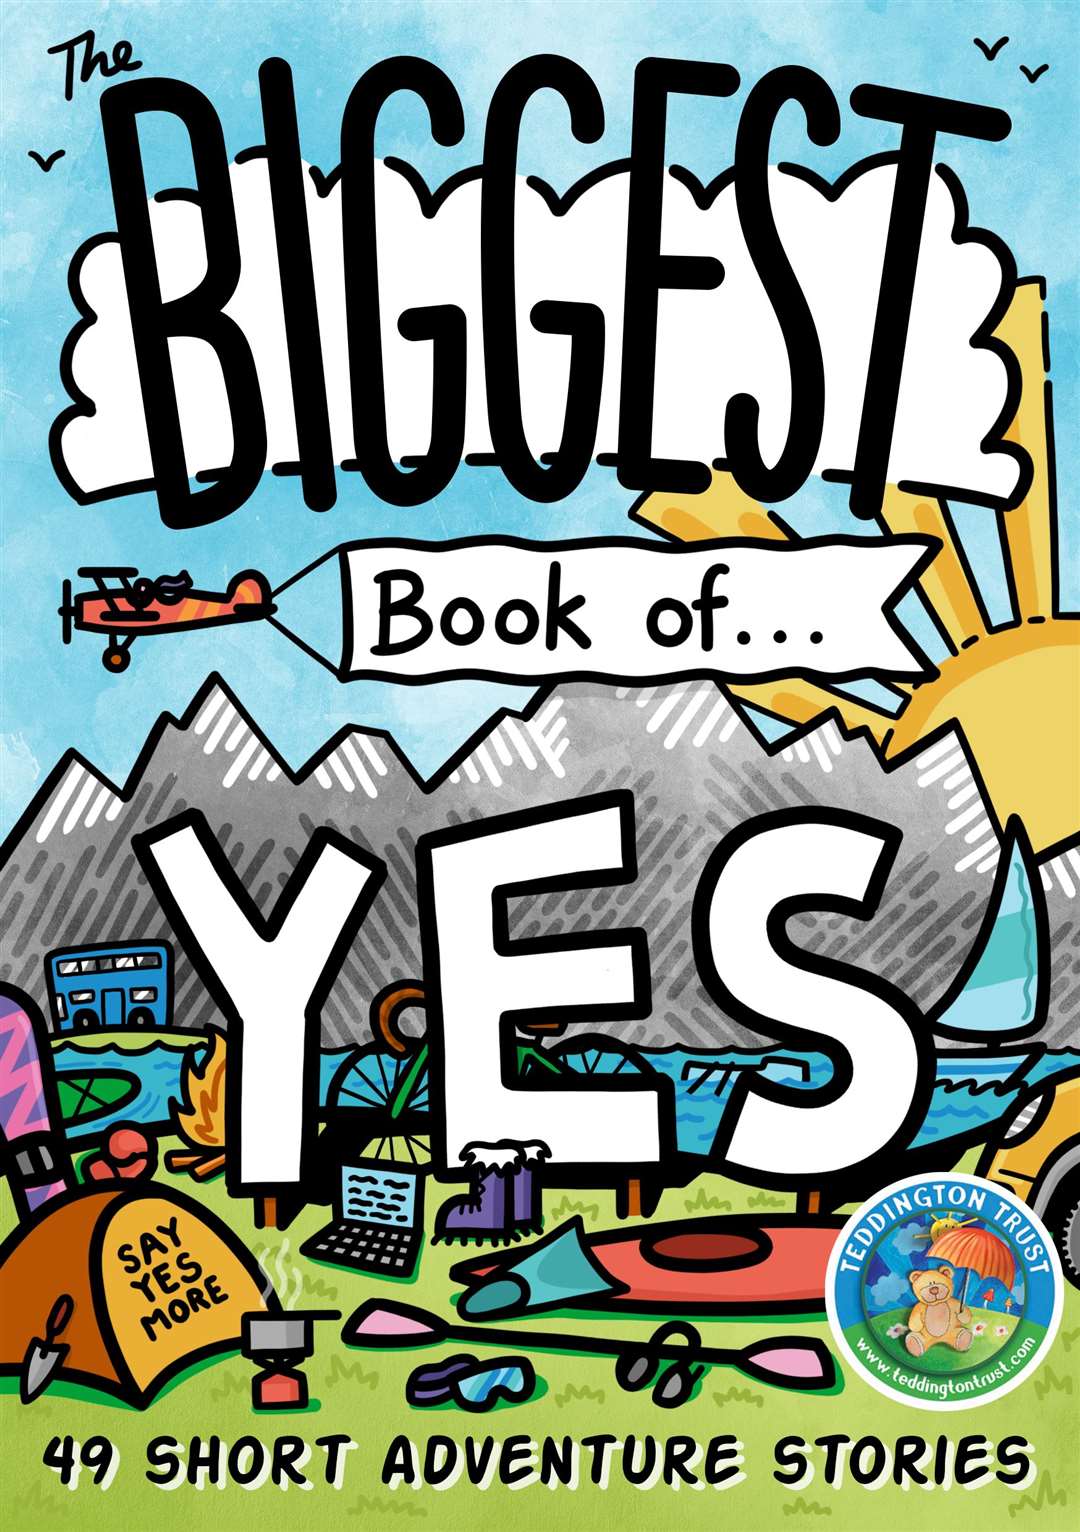 The Biggest Book of... Yes is the third anthology from The Yes Tribe